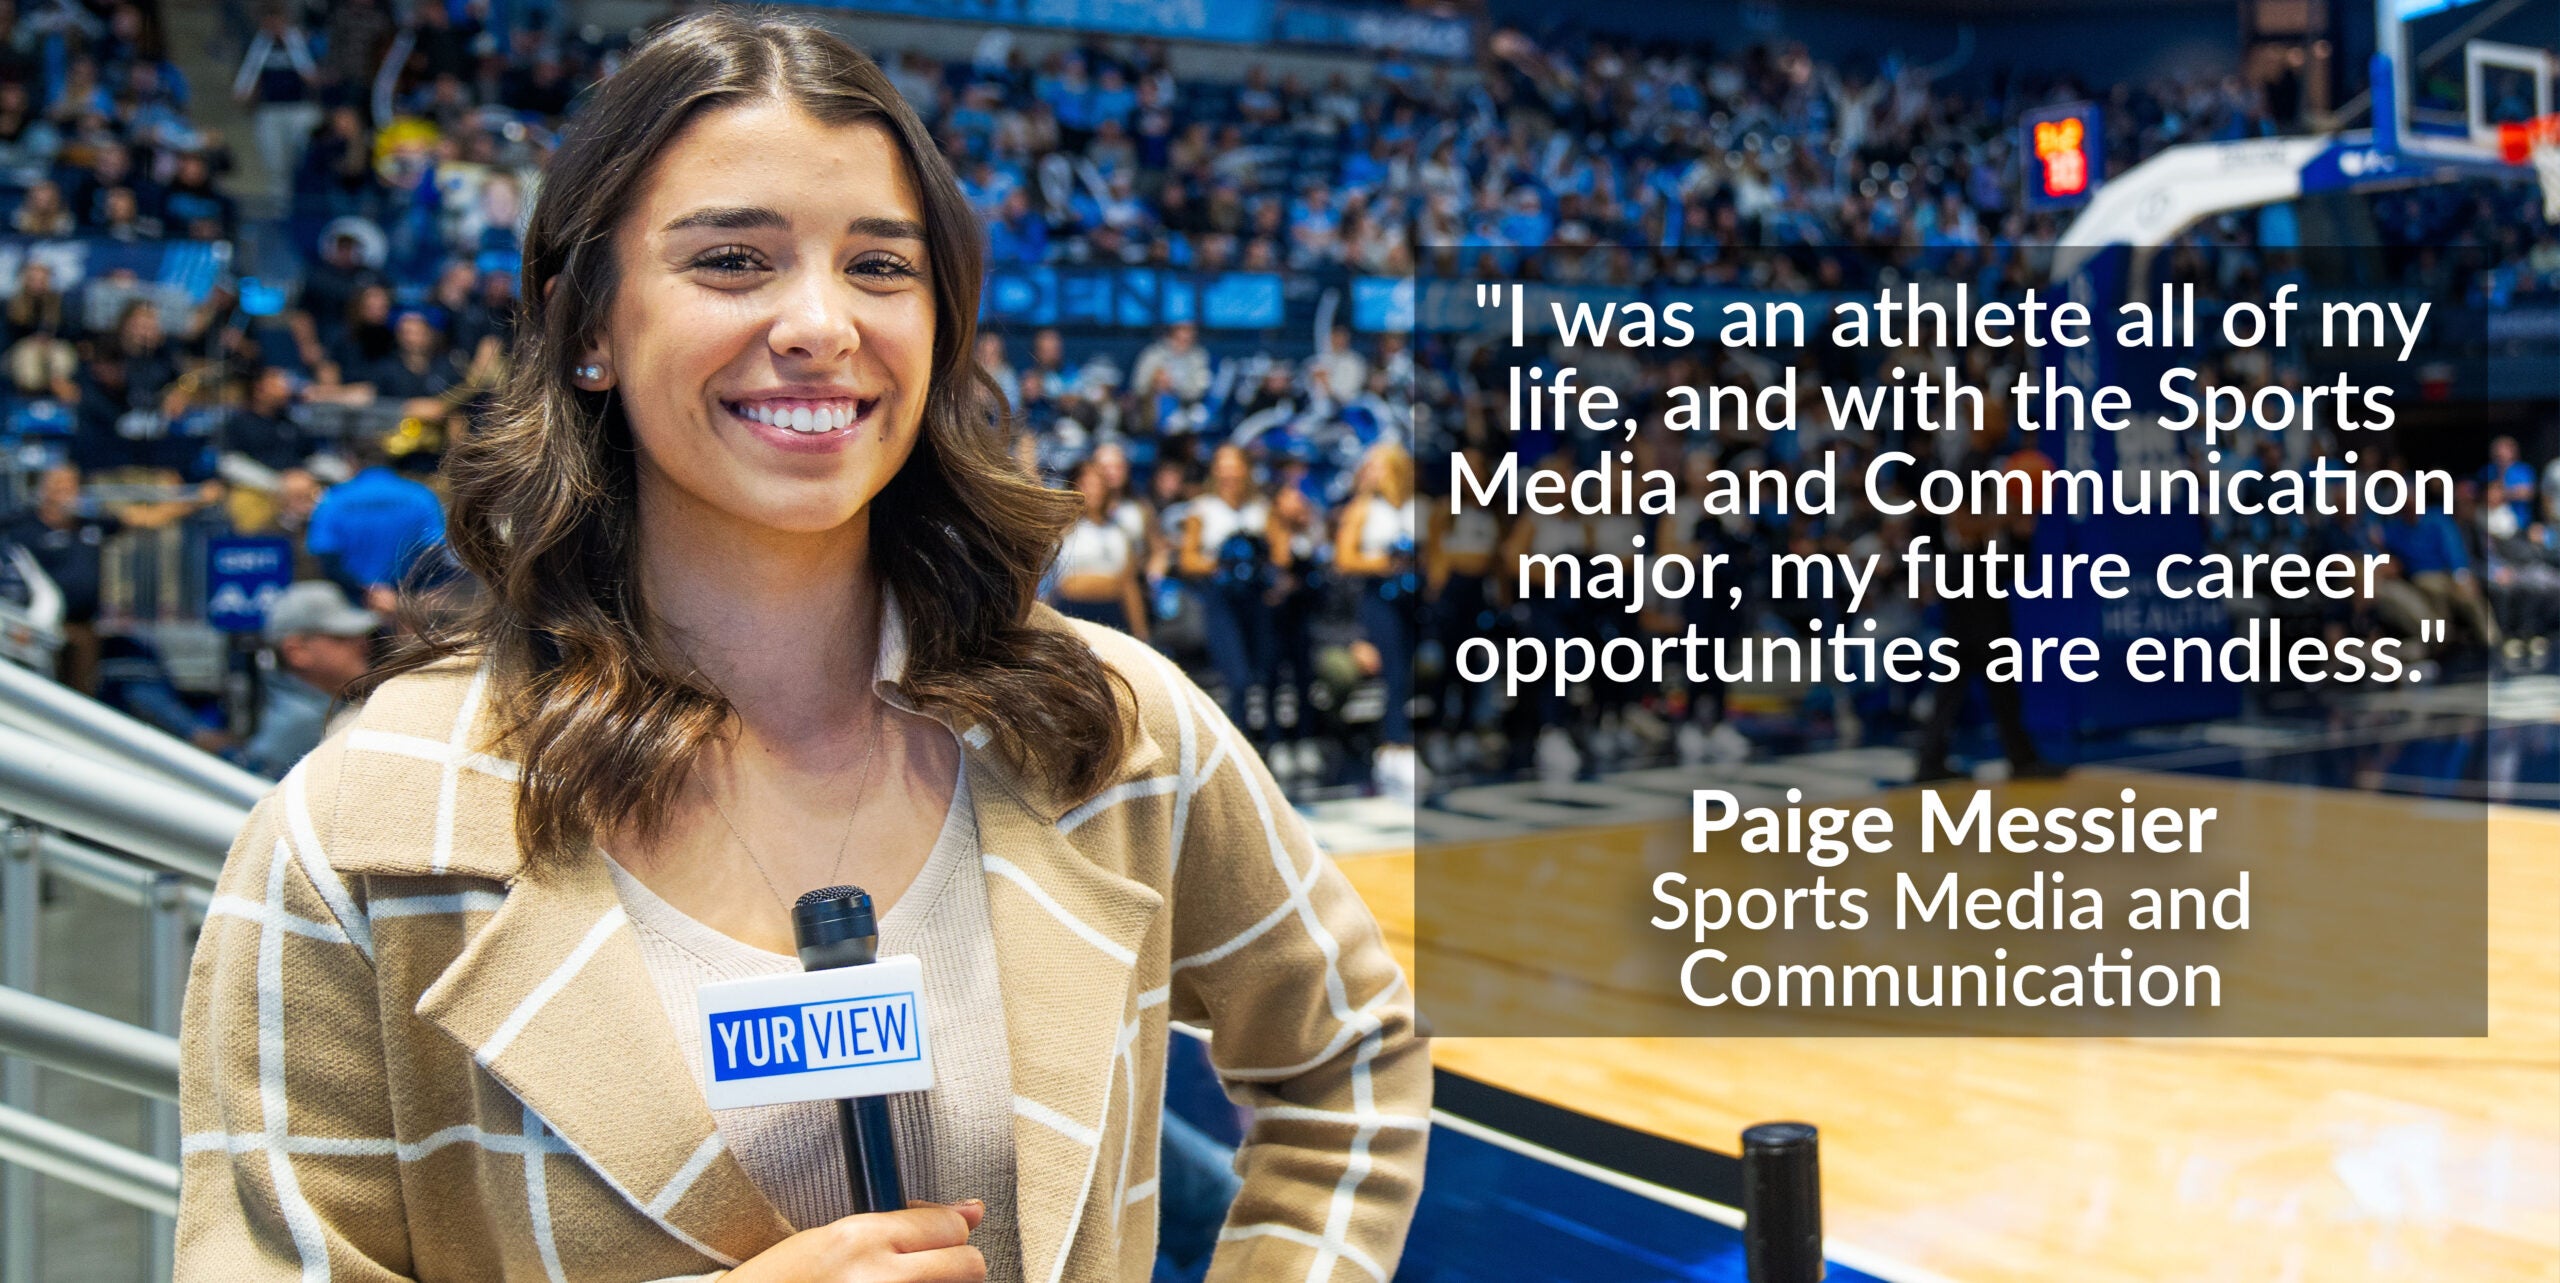 Photo of Sports Media Student, Paige Messier, with quote "I was an athlete all of my life, and with the Sports Media and Communication major, my future career opportunities are endless."